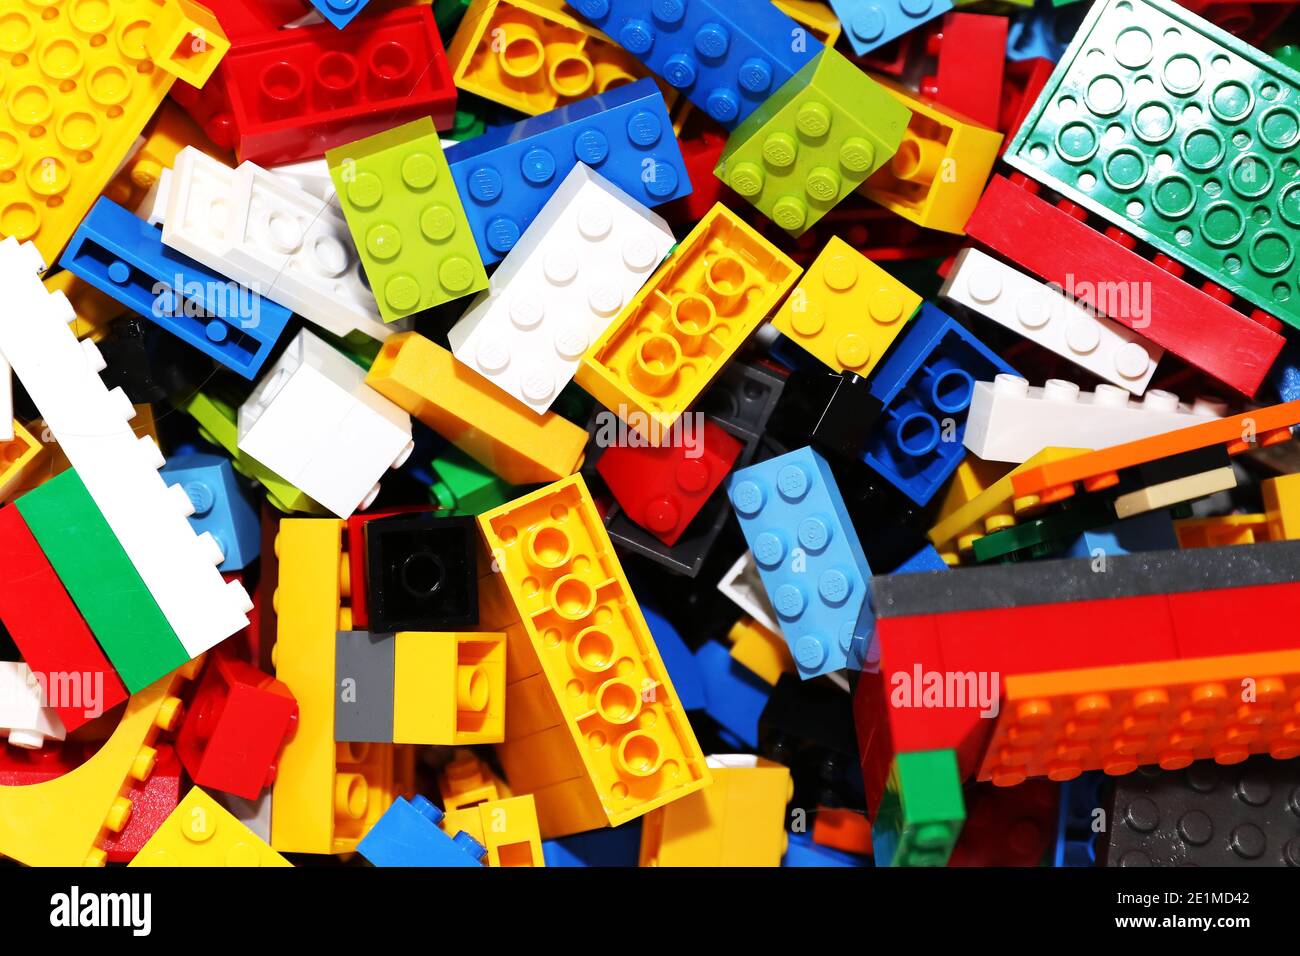 Lego Building Blocks  Picture by Antony Thompson - Thousand Word Media, NO SALES, NO SYNDICATION. Contact for more information mob: 07775556610 web: w Stock Photo